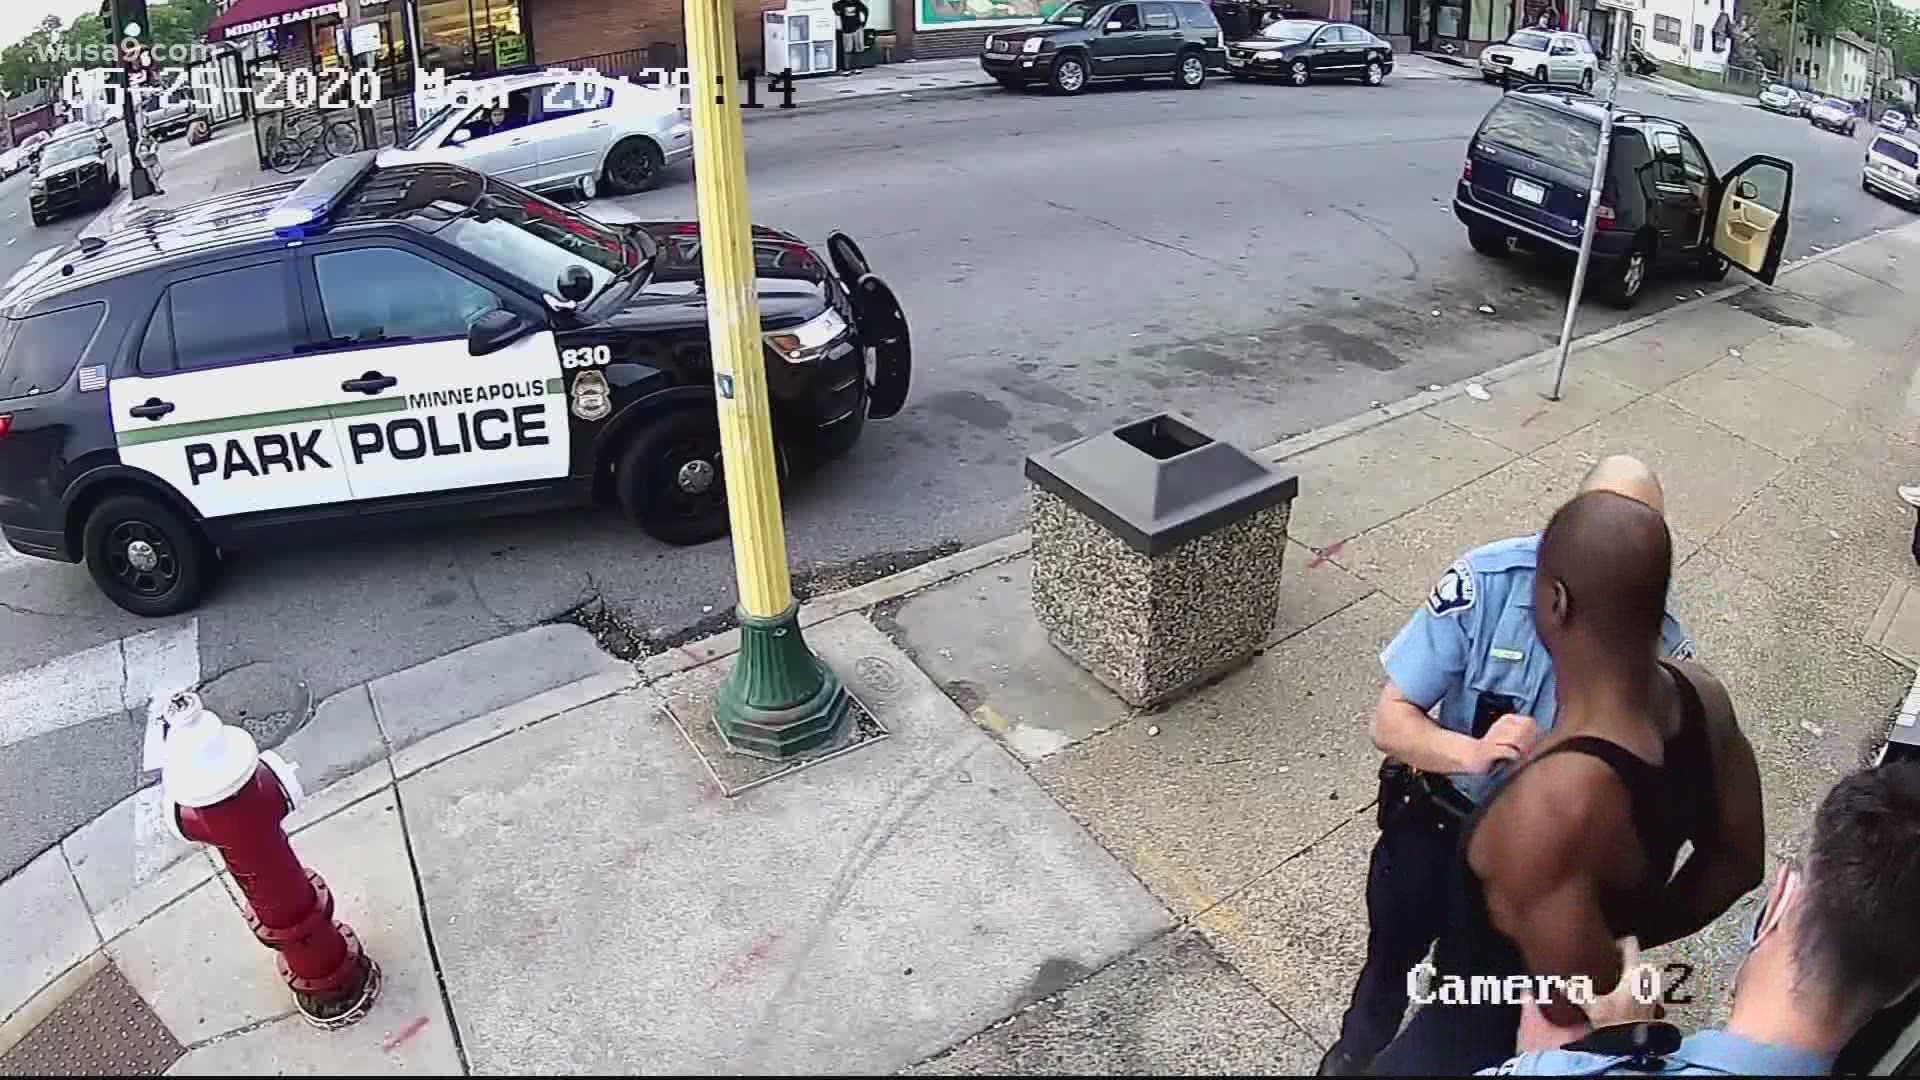 The leaked body cam video shows us what callousness looks like.